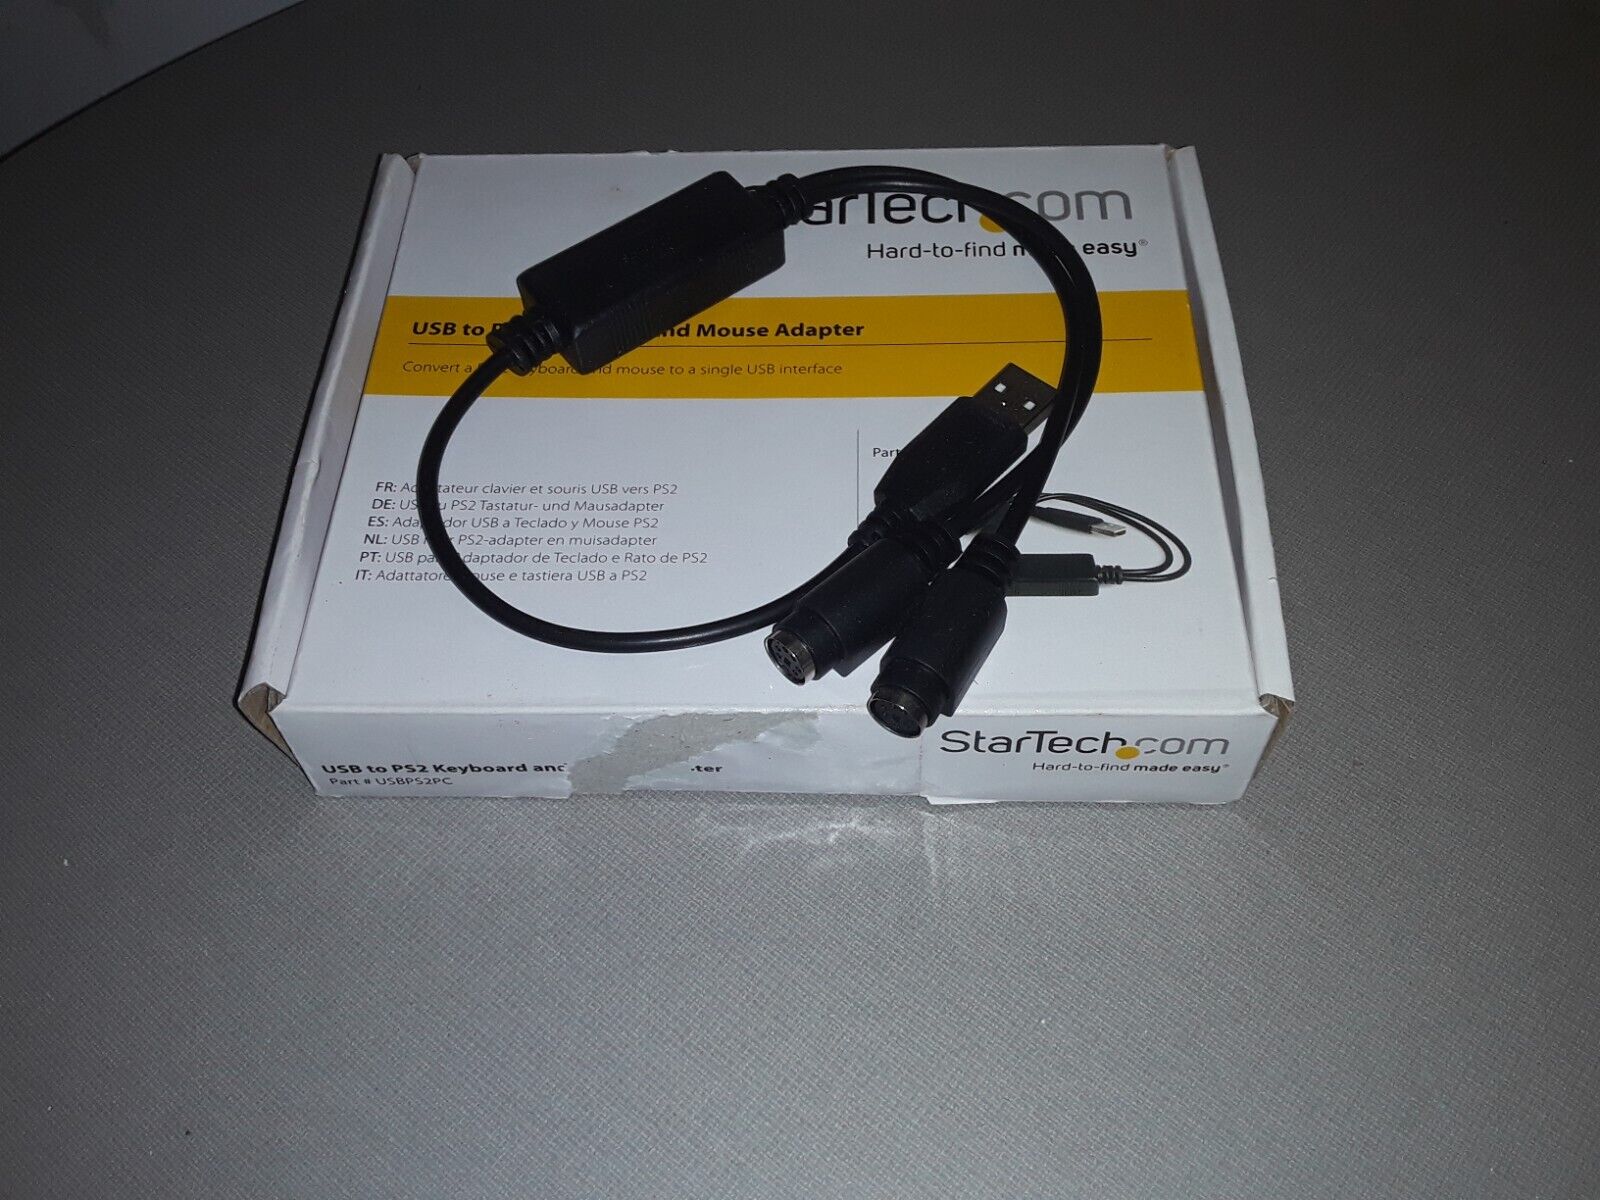 Lot of 2 StarTech USB to PS2 Keyboard and Mouse Adapter USBPS2PC - Open Box